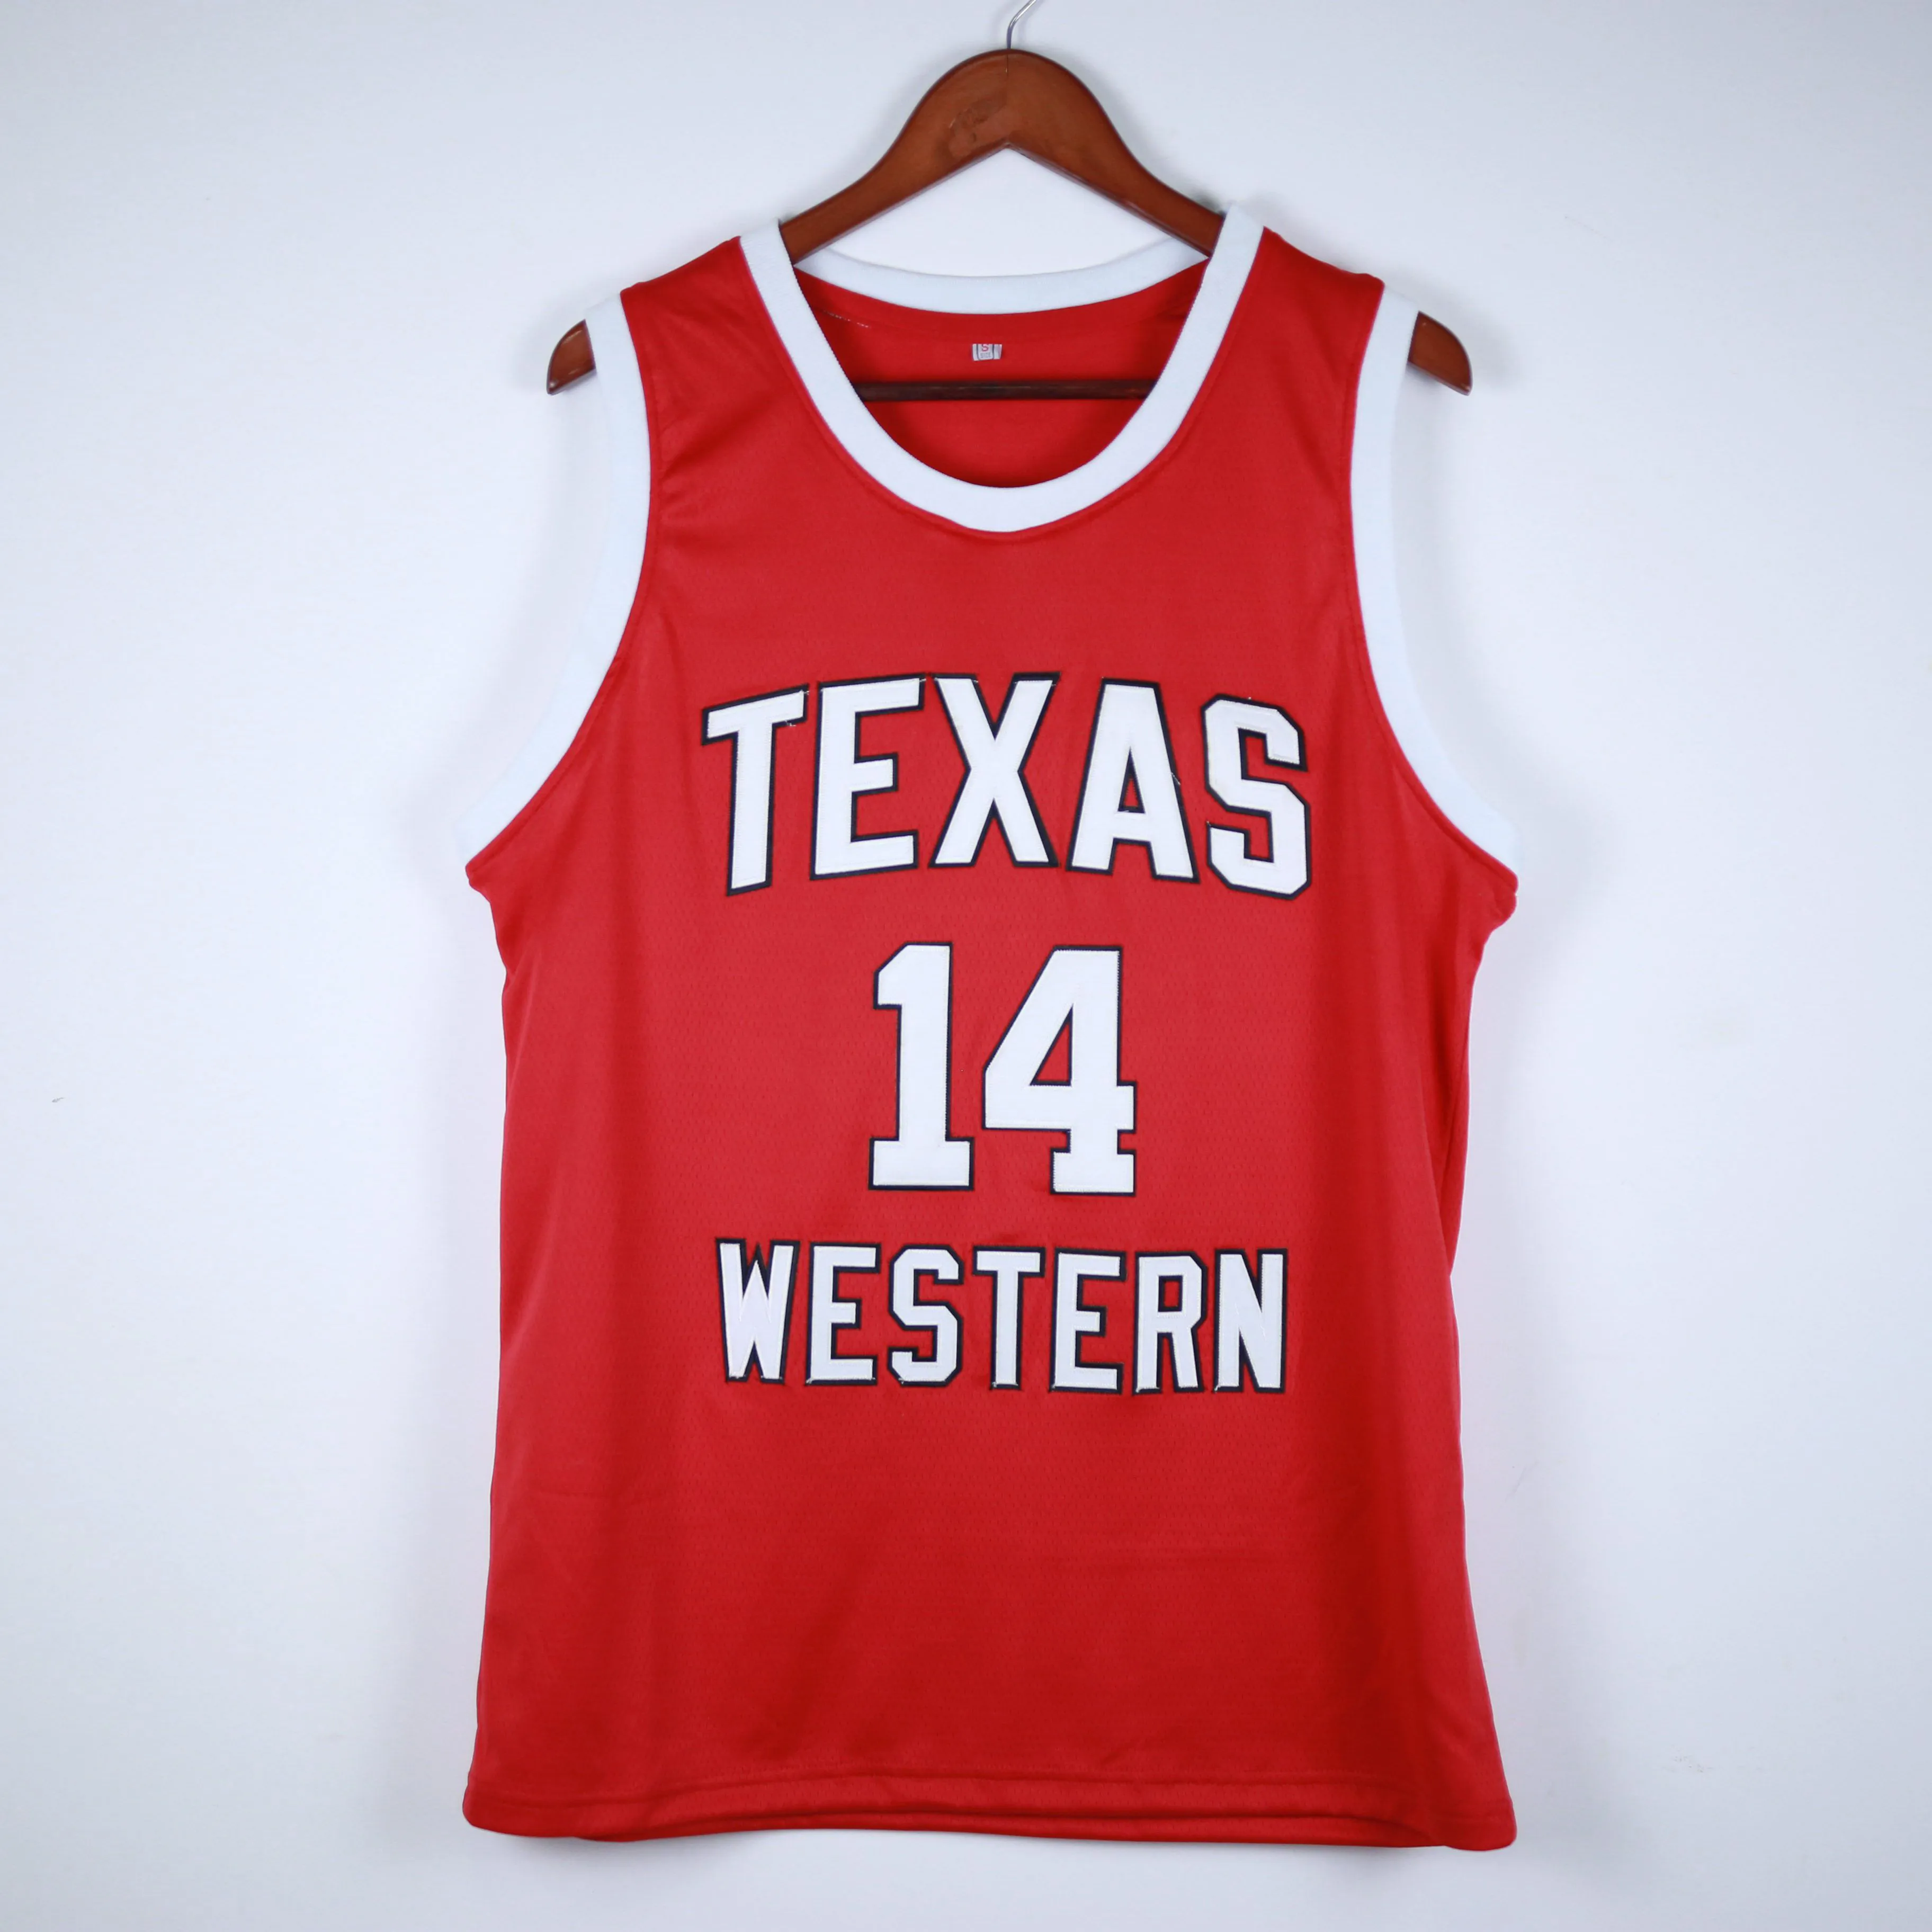 REAL Pictures Glory Road Bobby Joe Hill #14 Texas Western College Red Retro Basketball Jersey Cucite Magni Cucite da uomo Maglie